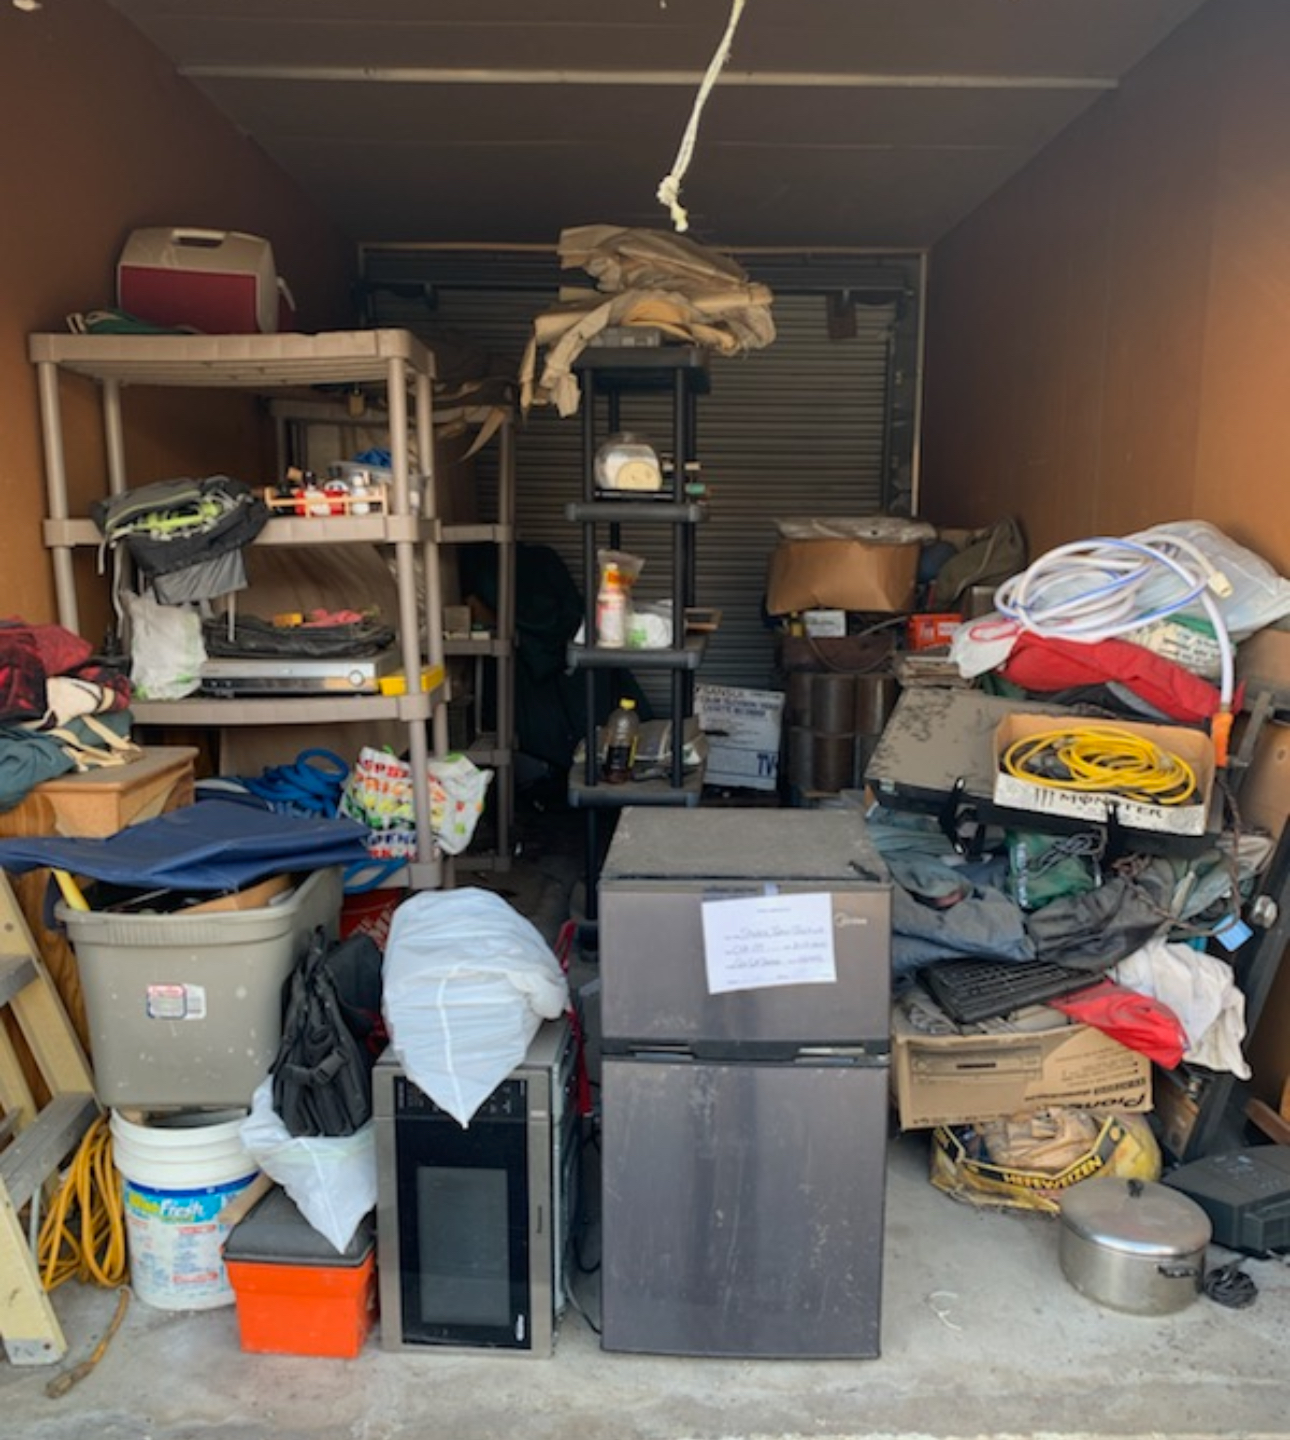 📷 Cirby Self Storage - Roseville  👀👉 NOTICE OF PUBLIC SALE POSTED (PICS POSTED) (3) 5x10’s, (3) 10x20’s, (1) 4x5, (1) 10x30 @ 175 Cirby Way, Roseville, CA 95678, USA 916.782.5255 | Roseville | California | United States